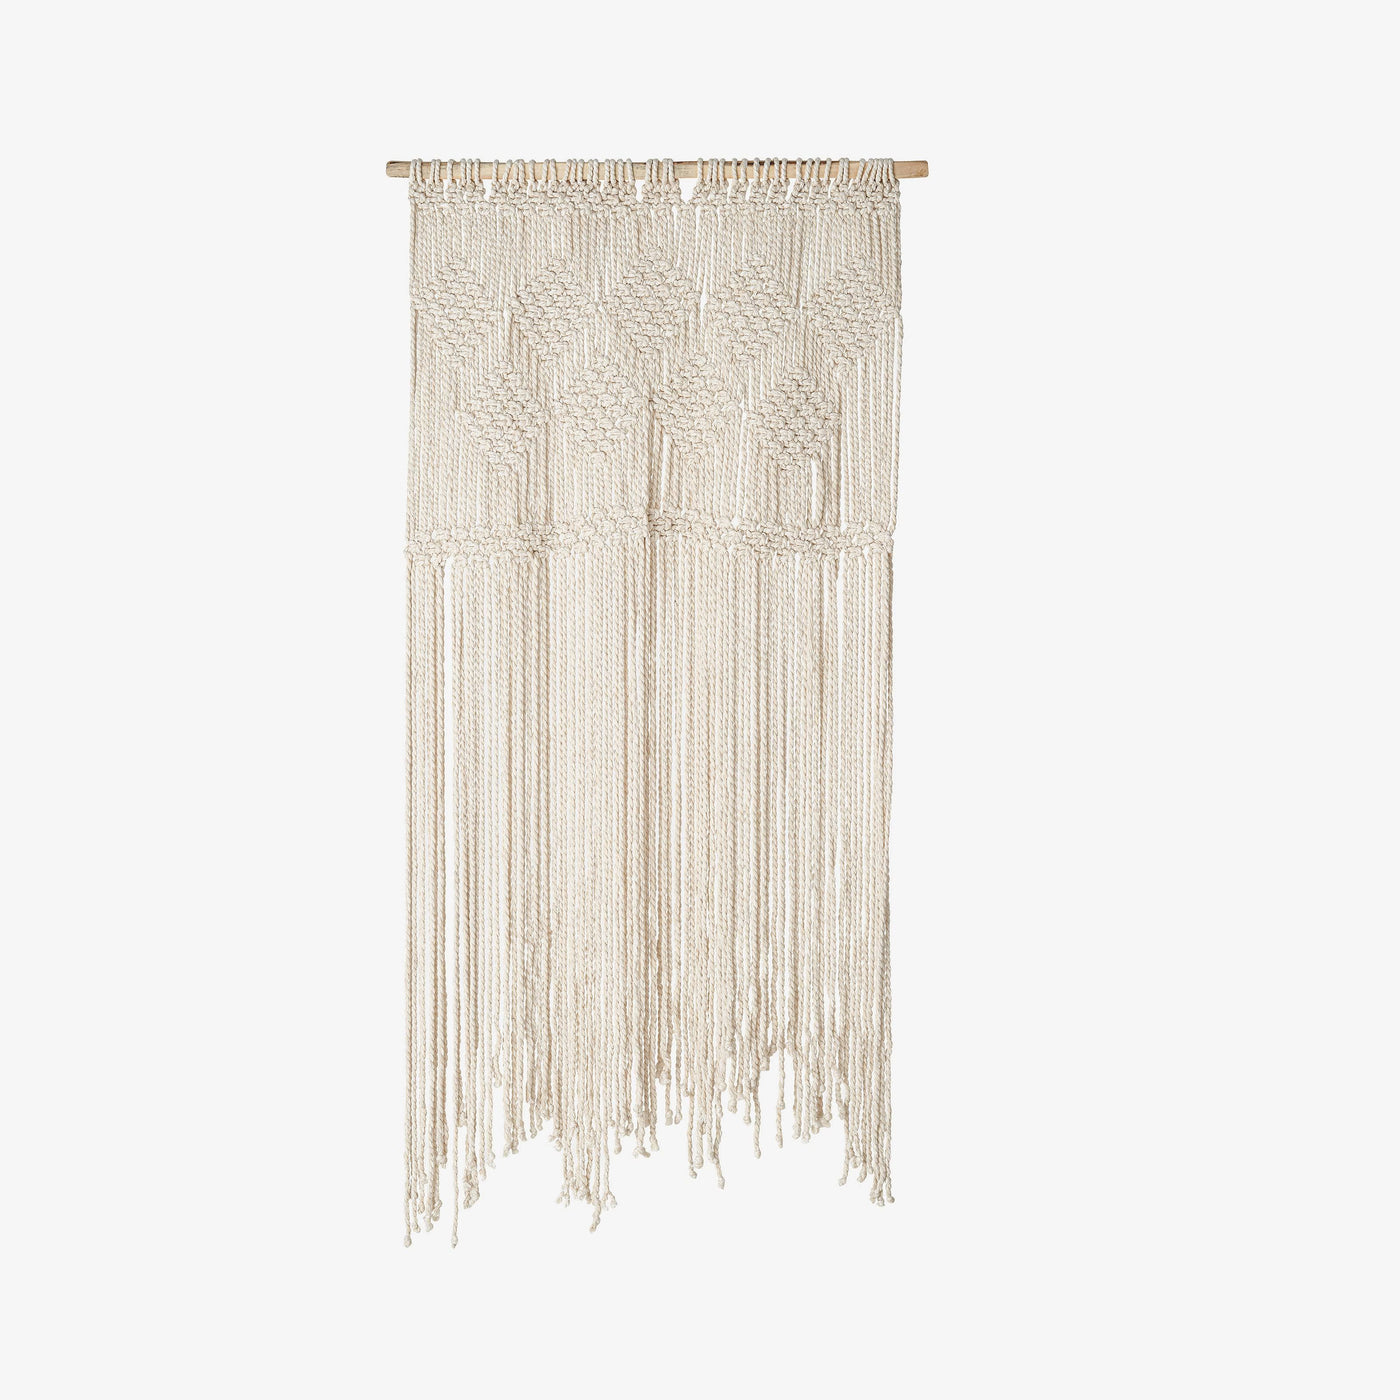 Delle Cotton Macramé Wall Hanging Curtain, Off-White Wall Art sazy.com